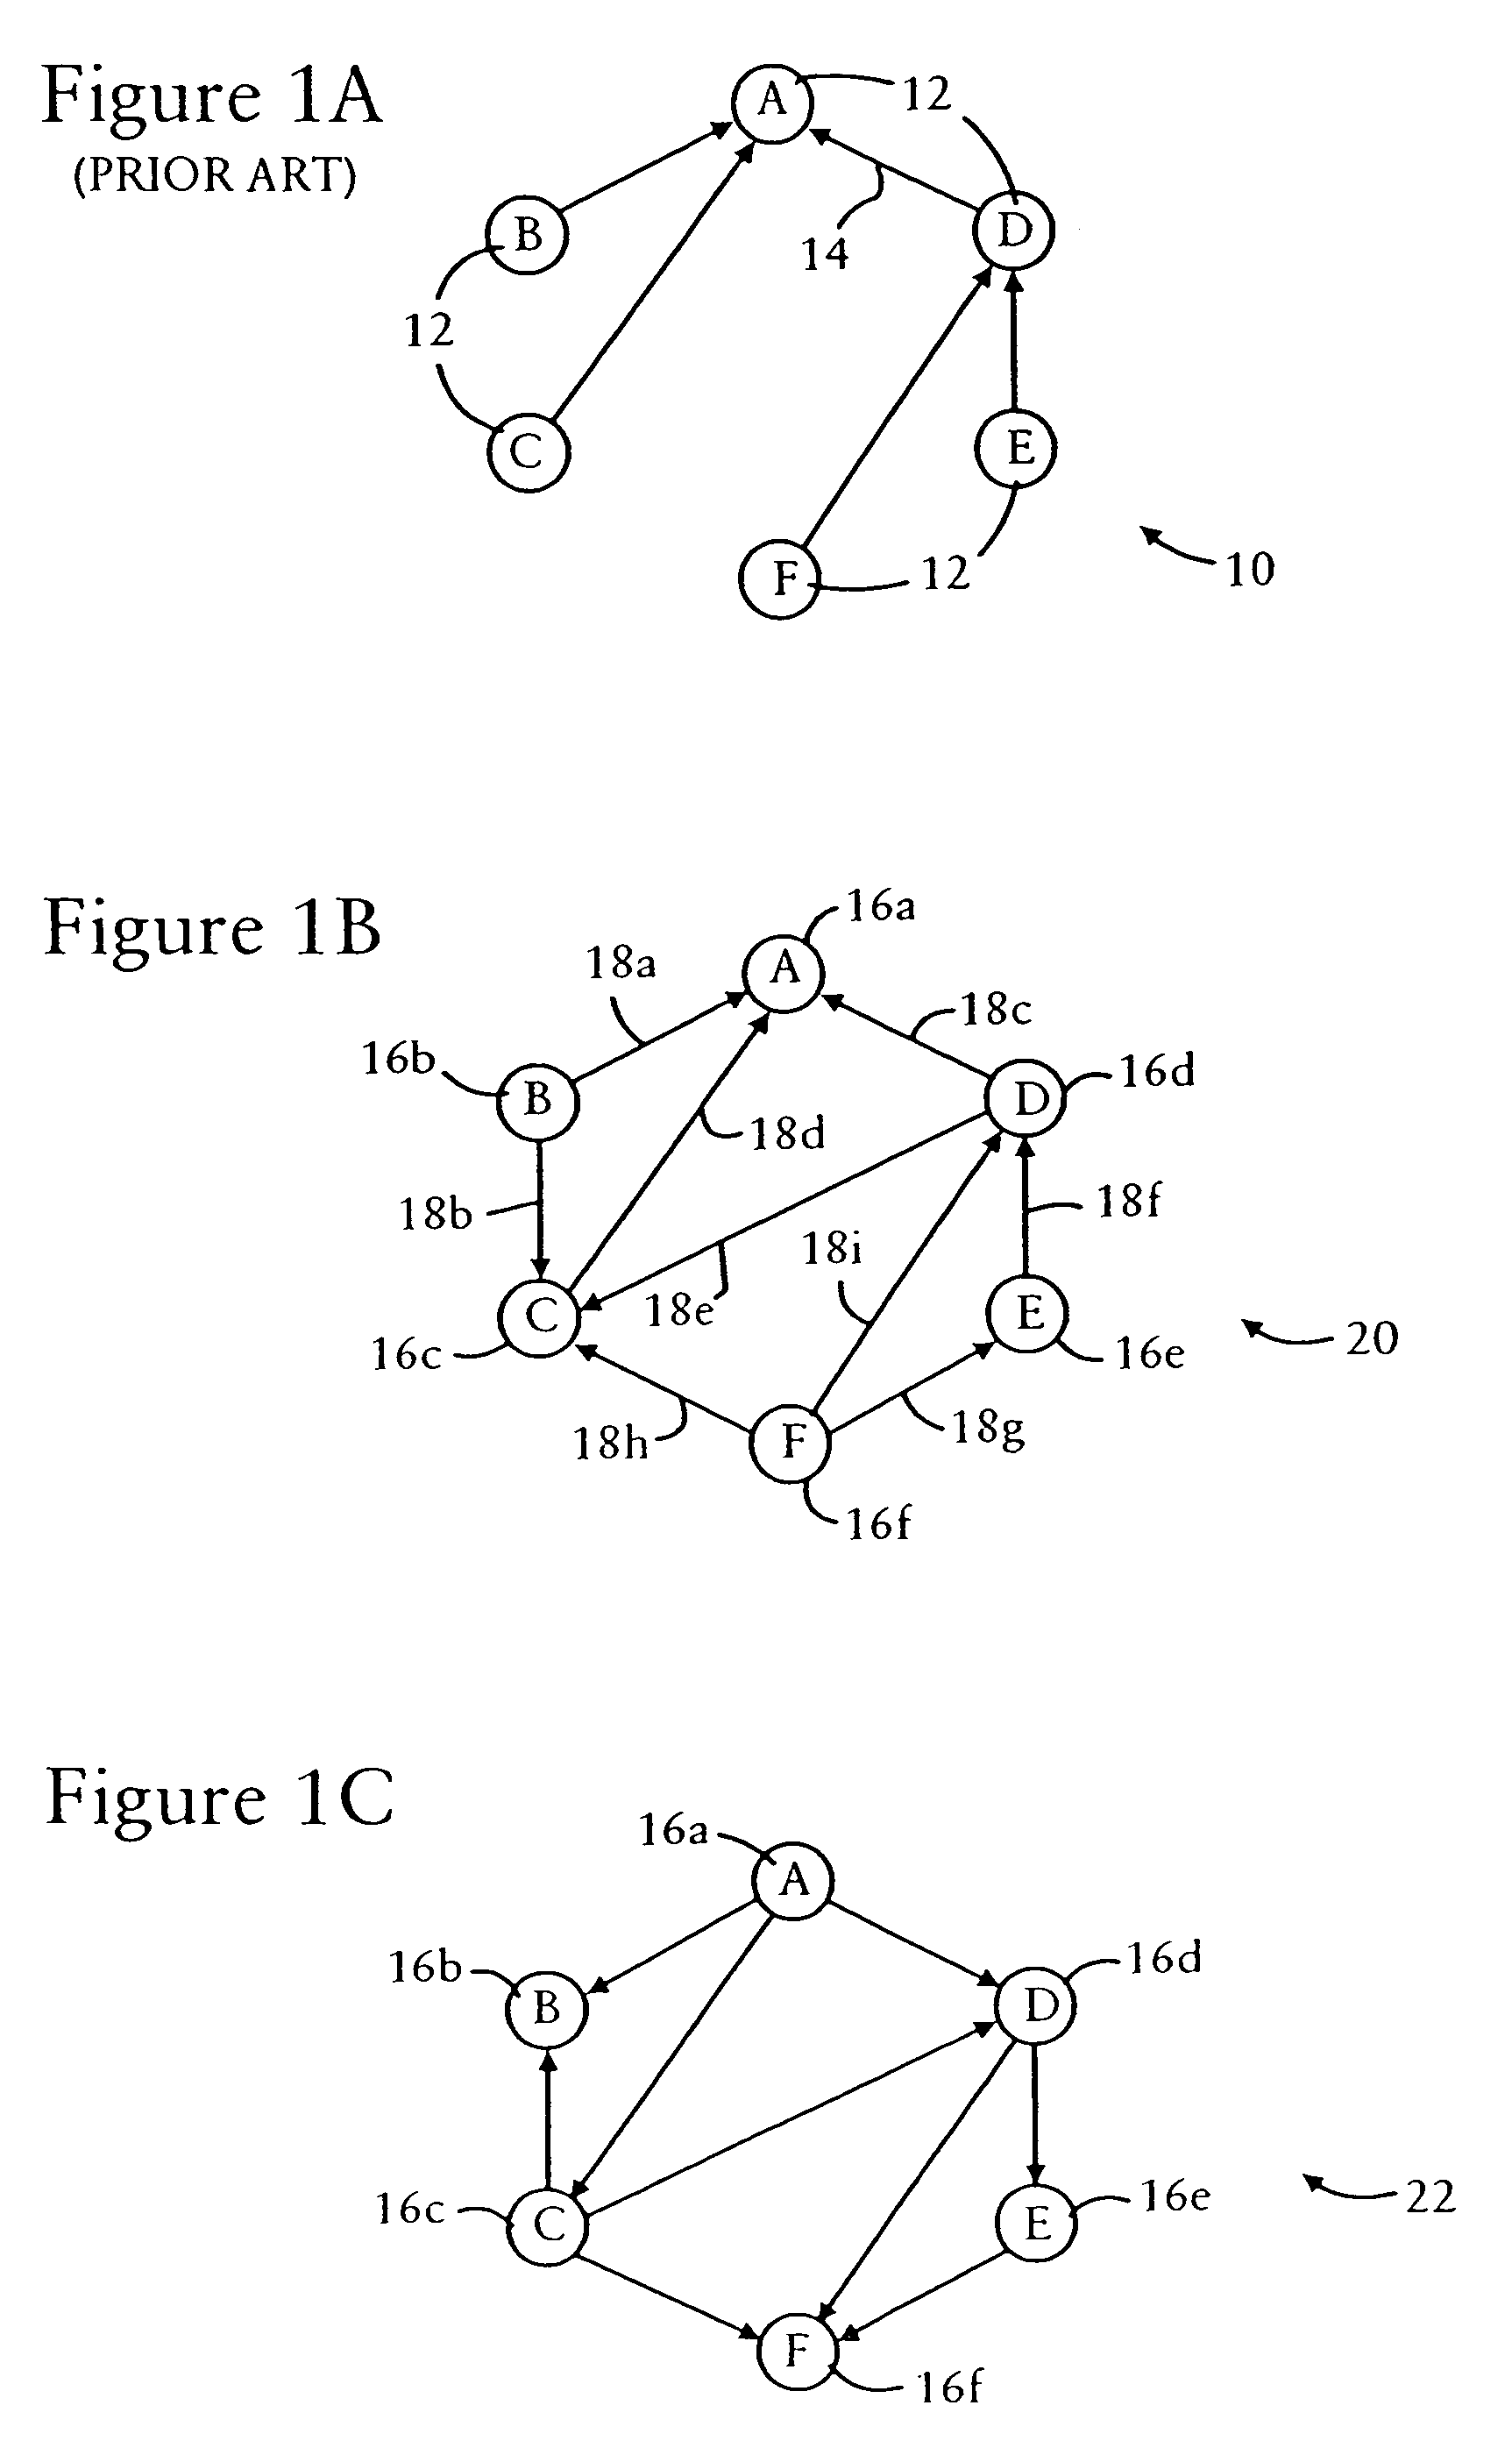 Directed acyclic graph discovery and network prefix information distribution relative to a clusterhead in an ad hoc mobile network